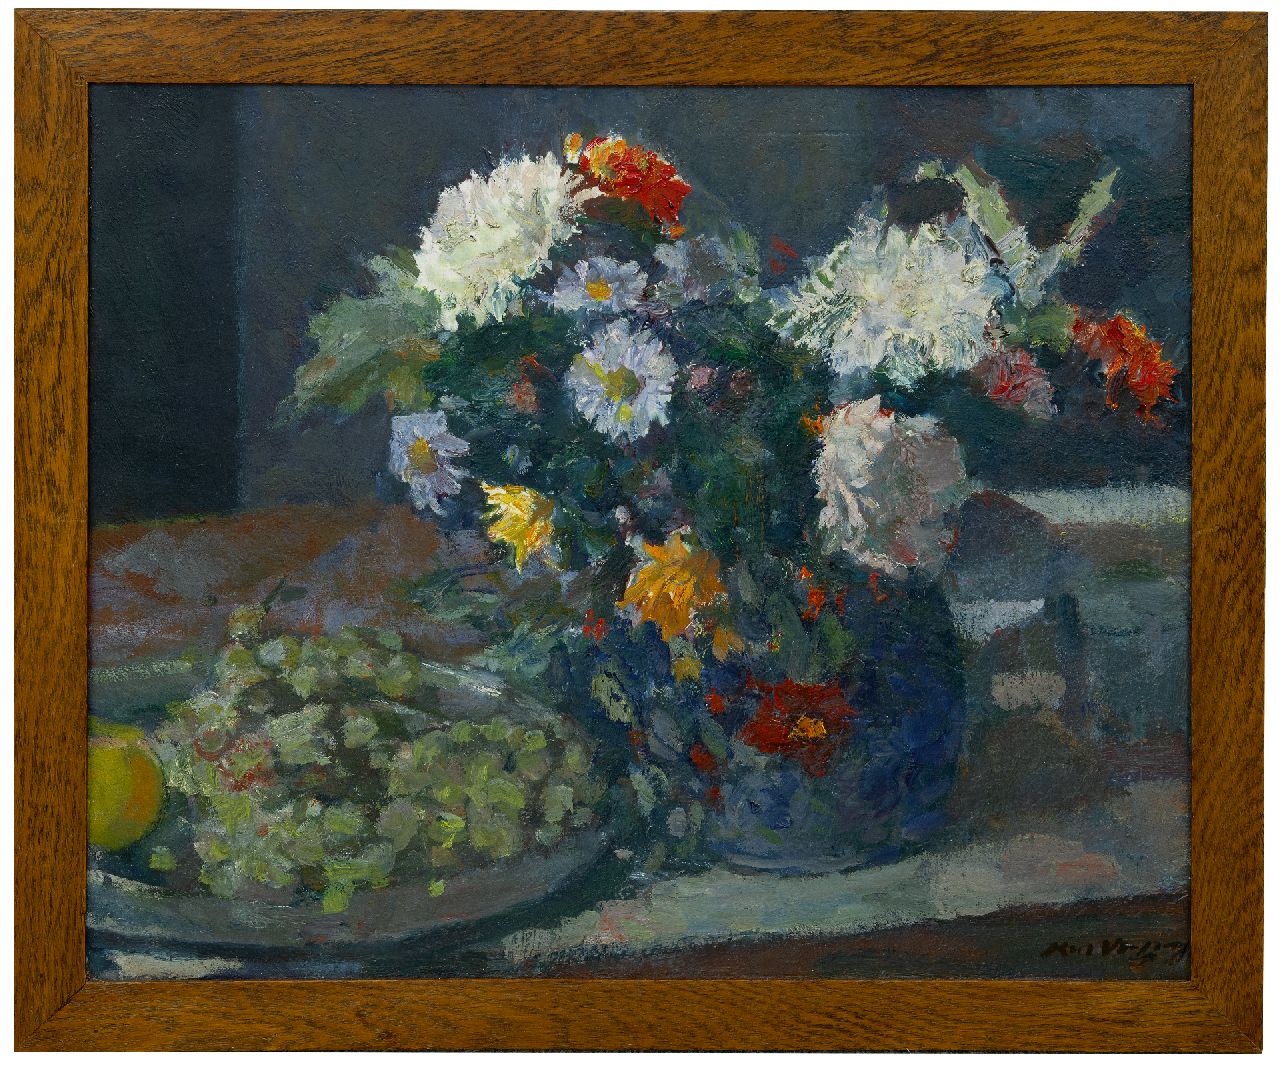 Verwey K.  | Kees Verwey | Paintings offered for sale | A still life with autumn flowers, oil on canvas 50.6 x 60.7 cm, signed l.r.